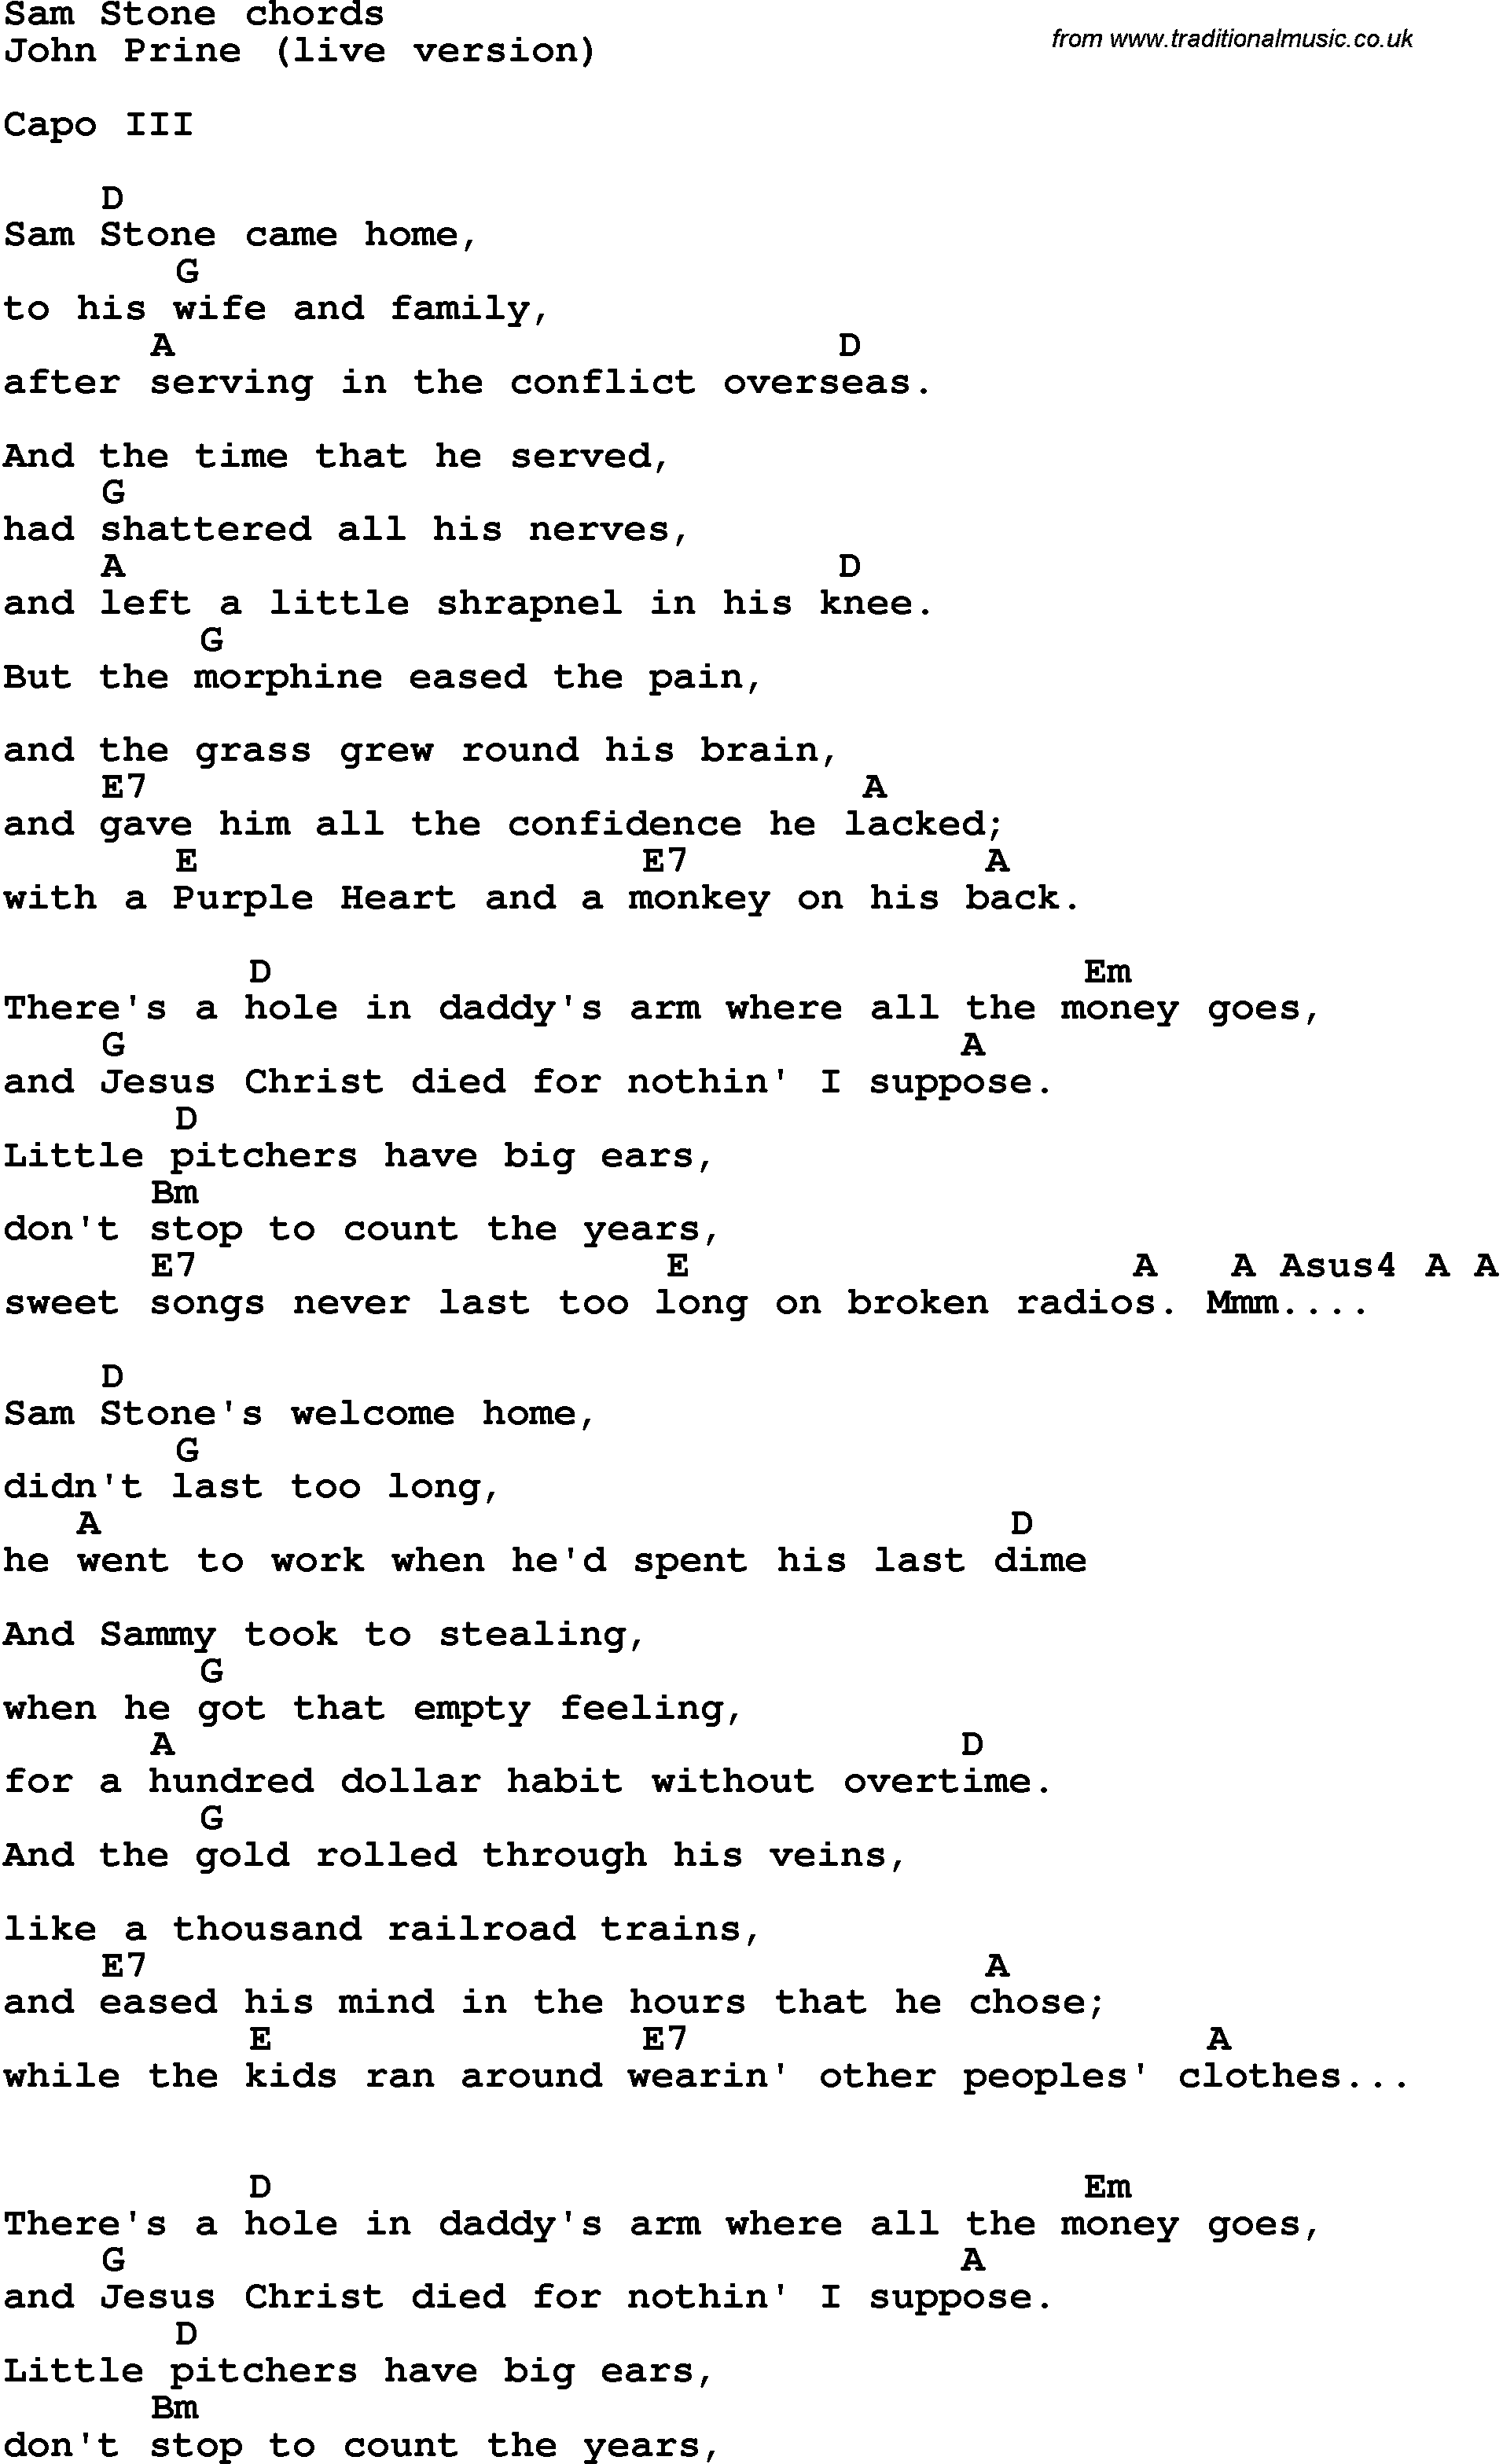 Song Lyrics with guitar chords for Sam Stone